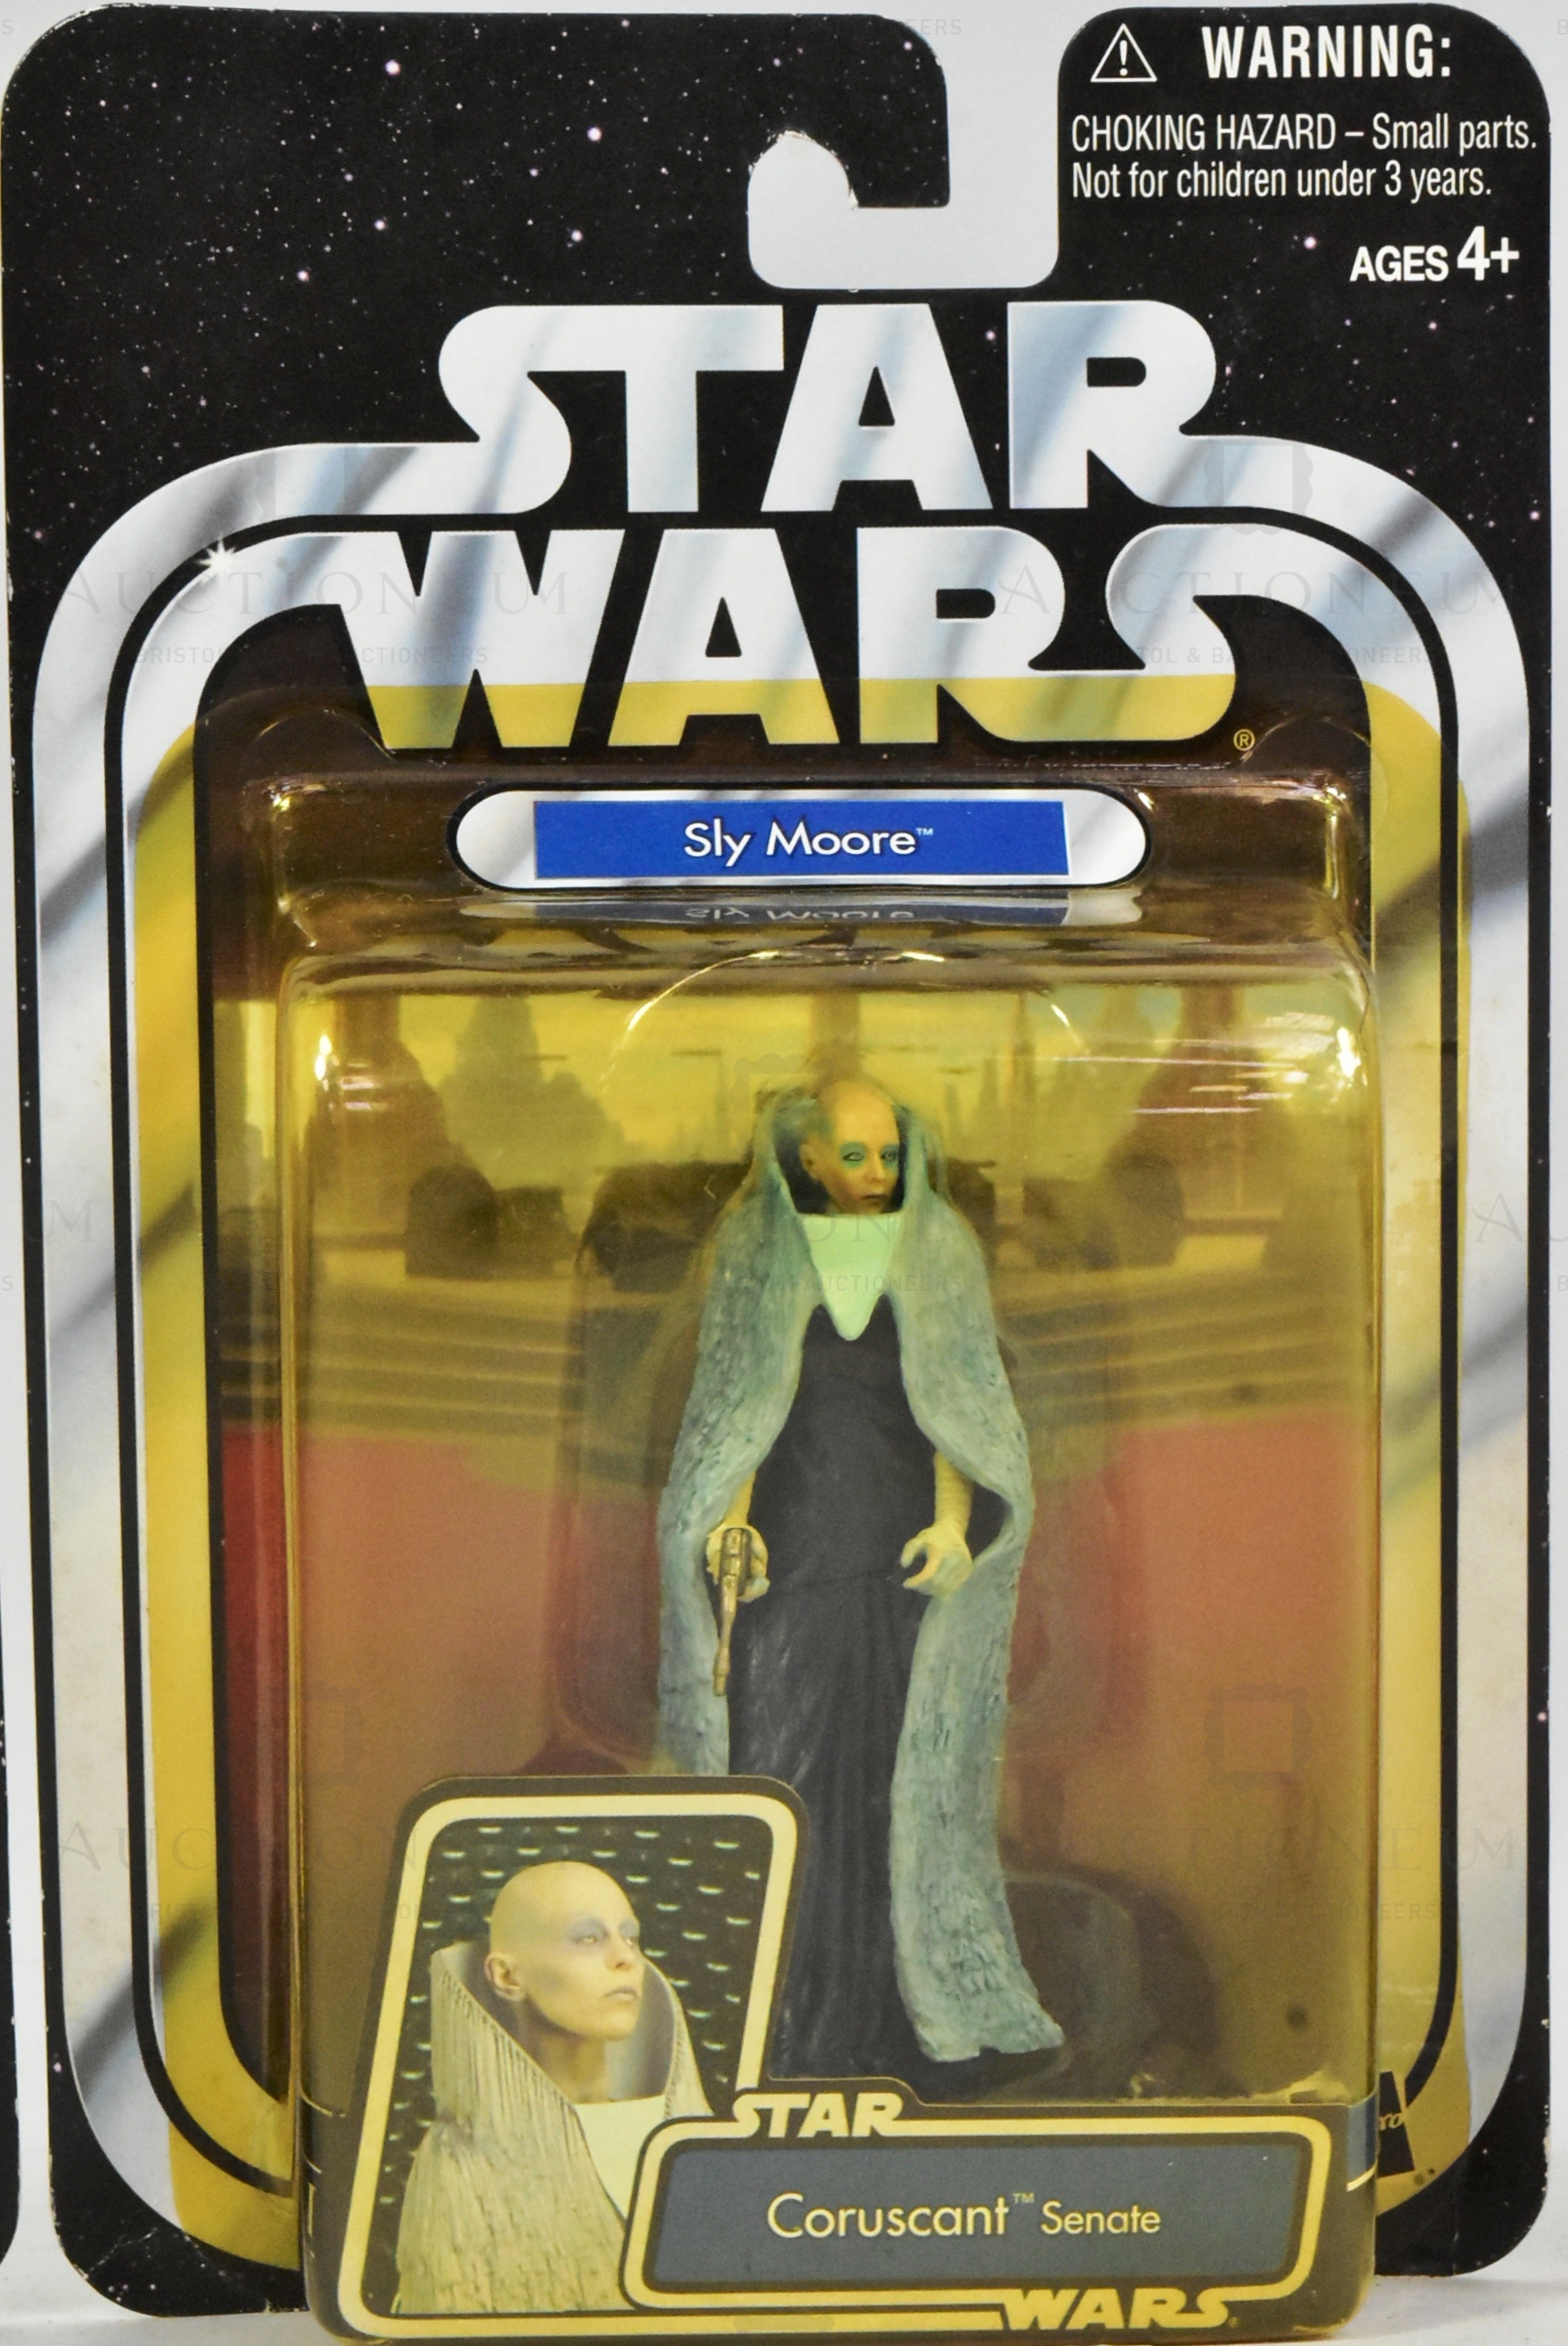 STAR WARS - 2004 COLLECTION OF CARDED ACTION FIGURES - Image 3 of 5